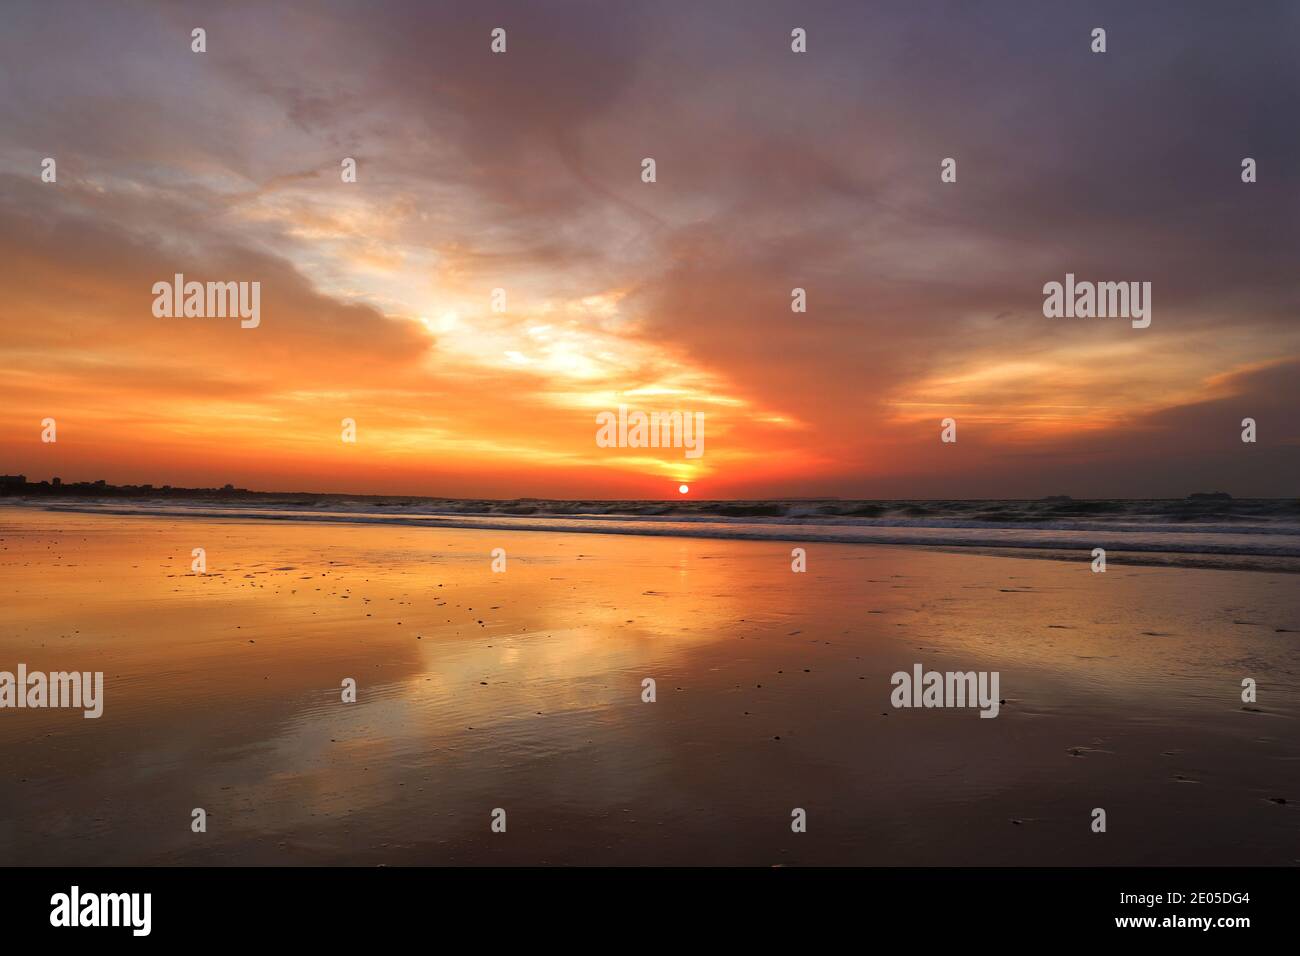 The sun rises in a blaze of fiery orange and red colours into a cloudy winter sky, all reflected in the wet sand of Bournemouth beach. Stock Photo